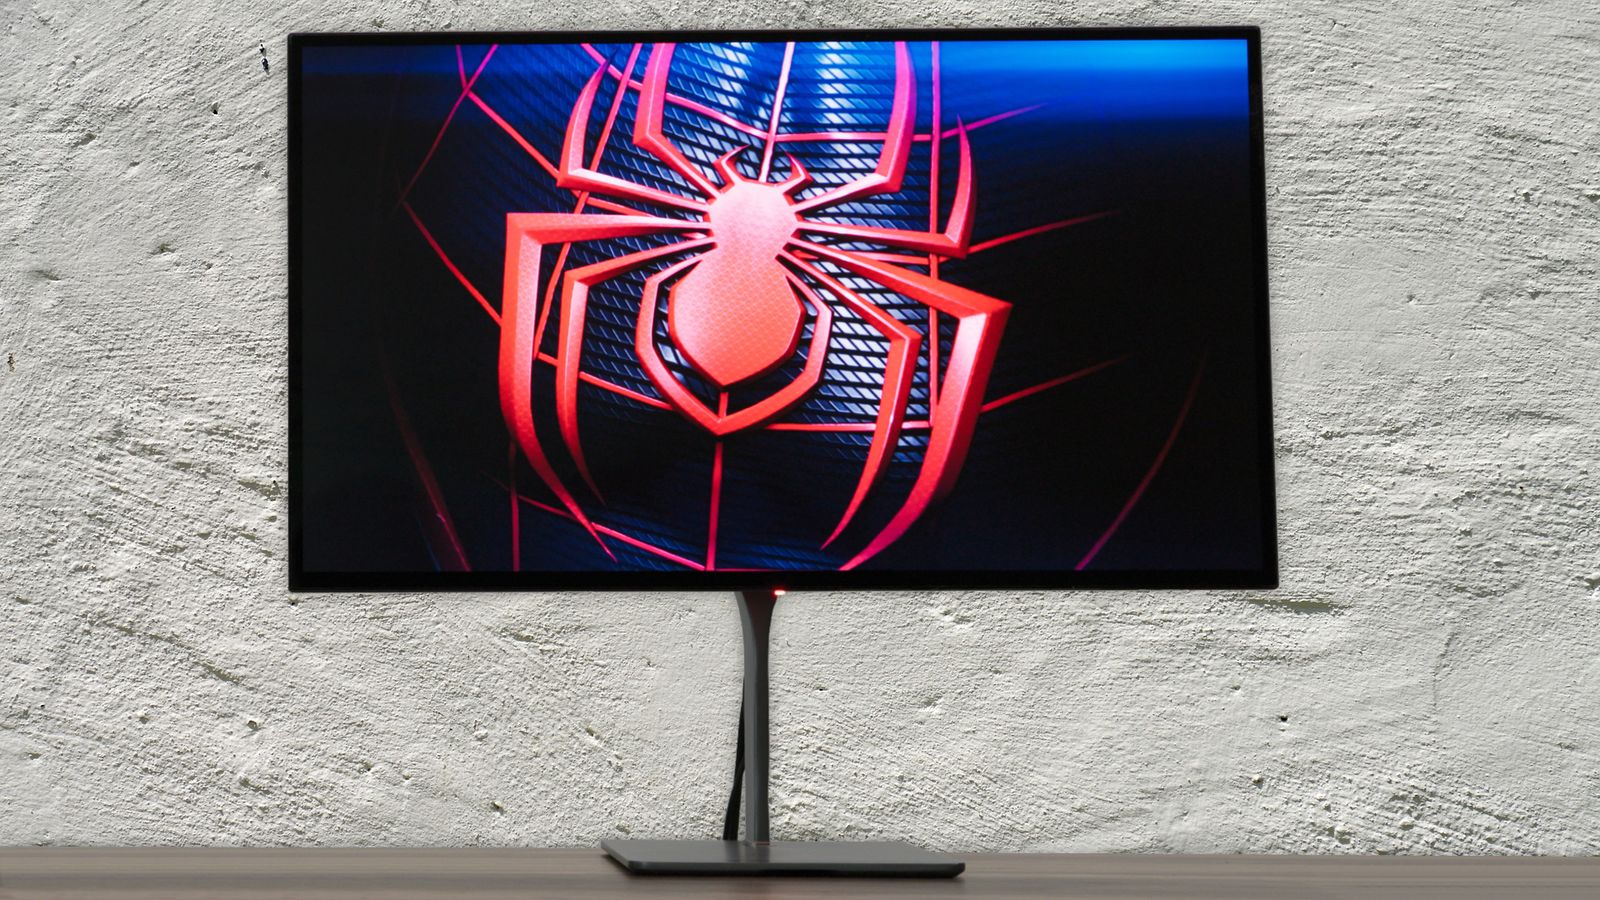 A Dough Spectrum Black OLED monitor with Miles Morales' Spider-Man logo on the front